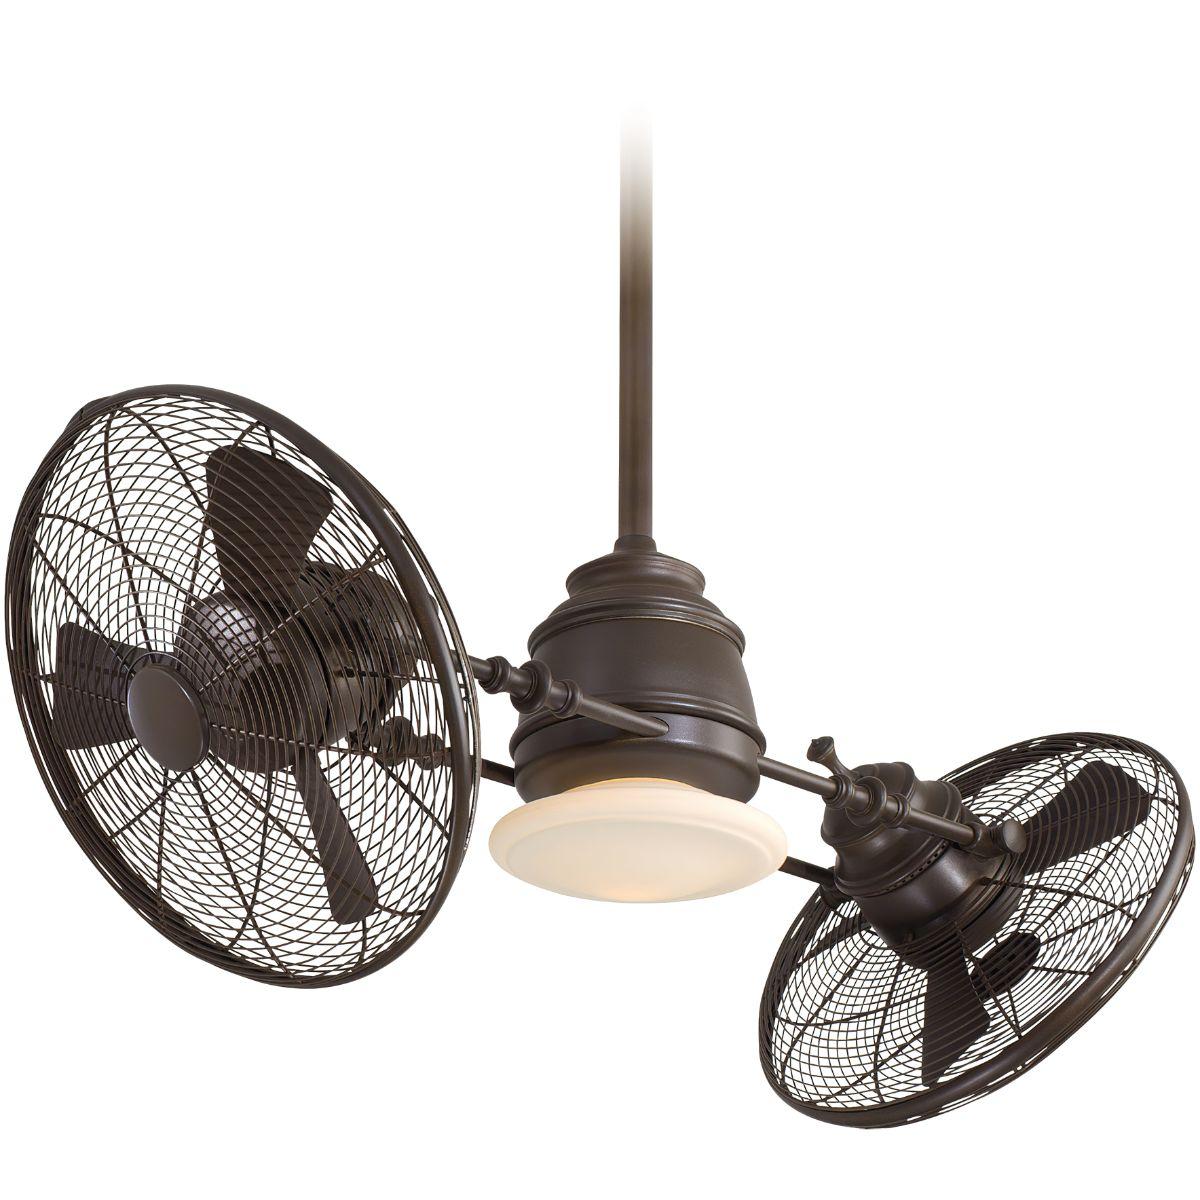 Vintage Gyro 42 Inch Dual Ceiling Fan With Light, Wall Control Included - Bees Lighting